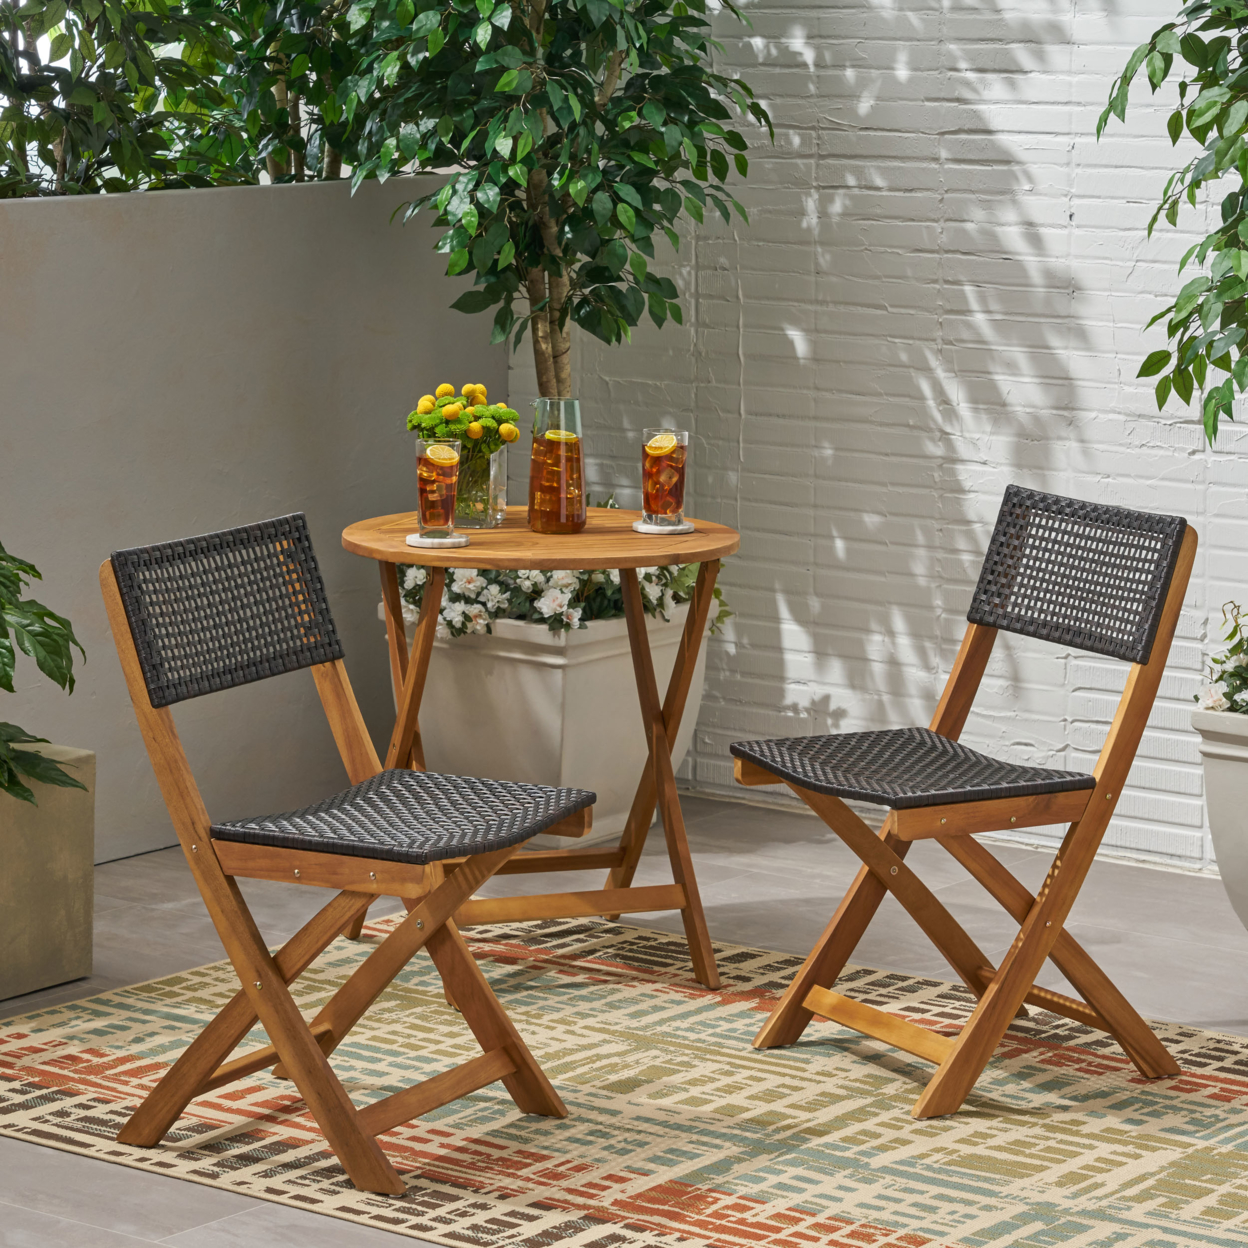 Ida Outdoor Acacia Wood Foldable Bistro Chairs With Wicker Seating (Set Of 2) - Teak Finish + Brown Wicker